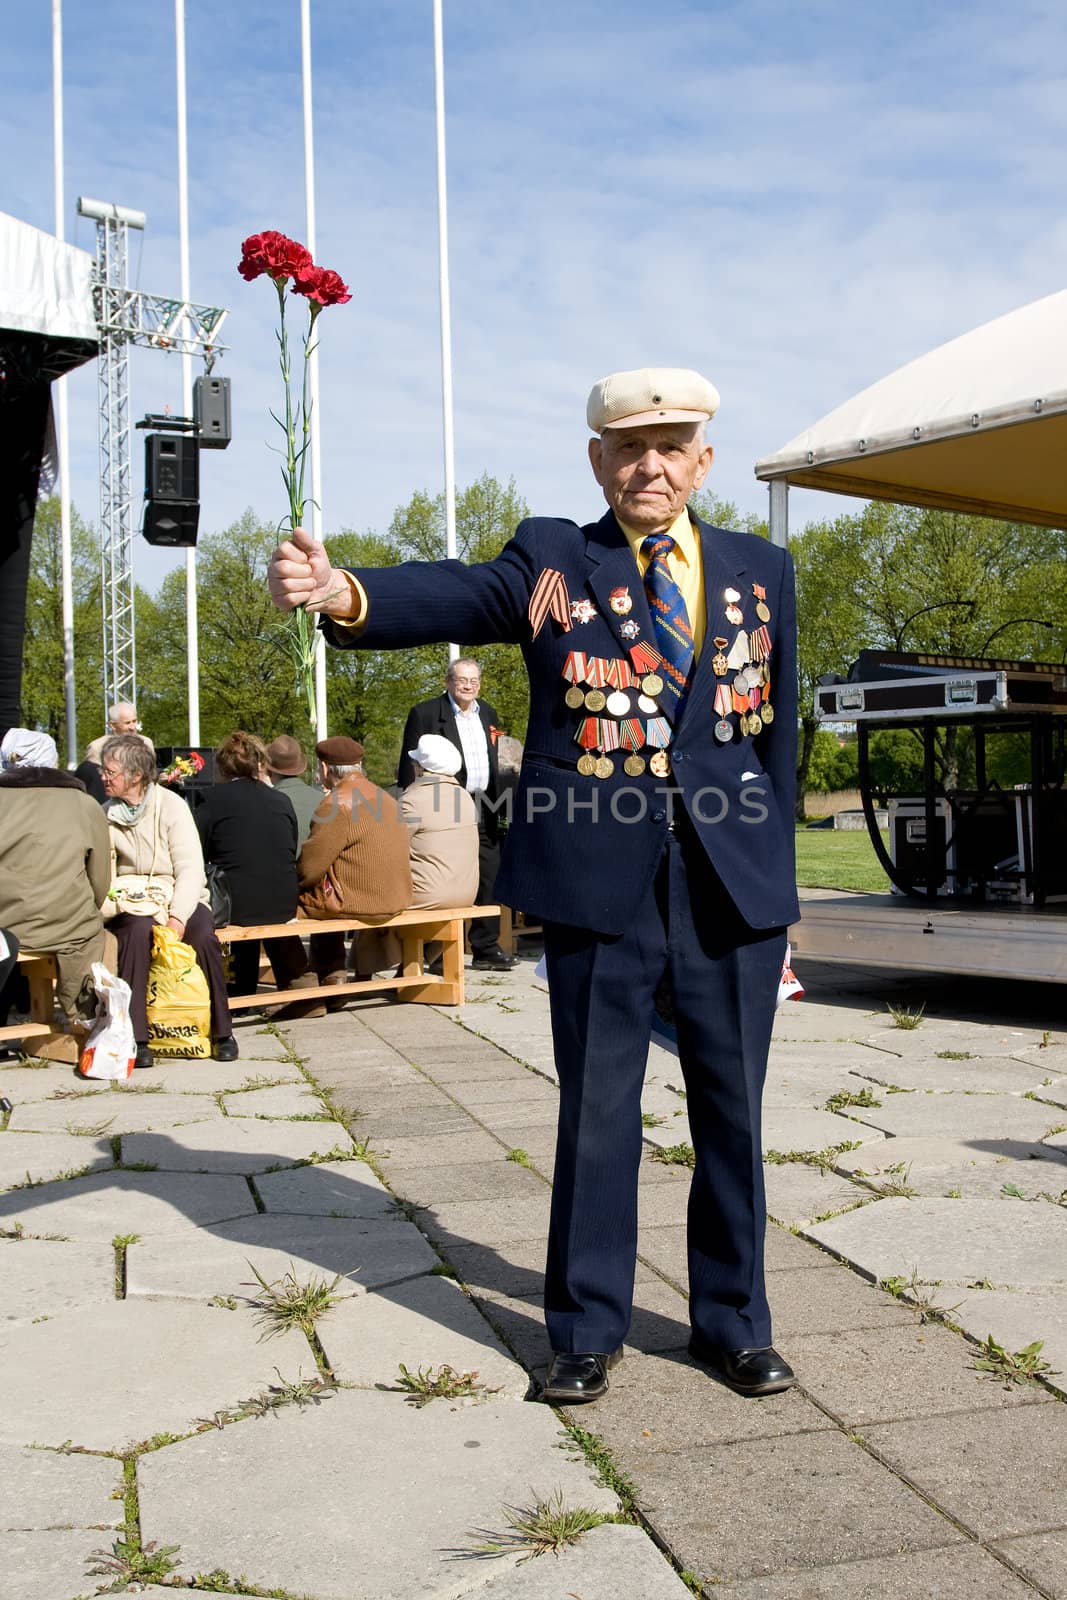 Celebration of Victory Day (Eastern Europe). Riga, Latvia, May 9, 2008 by ints